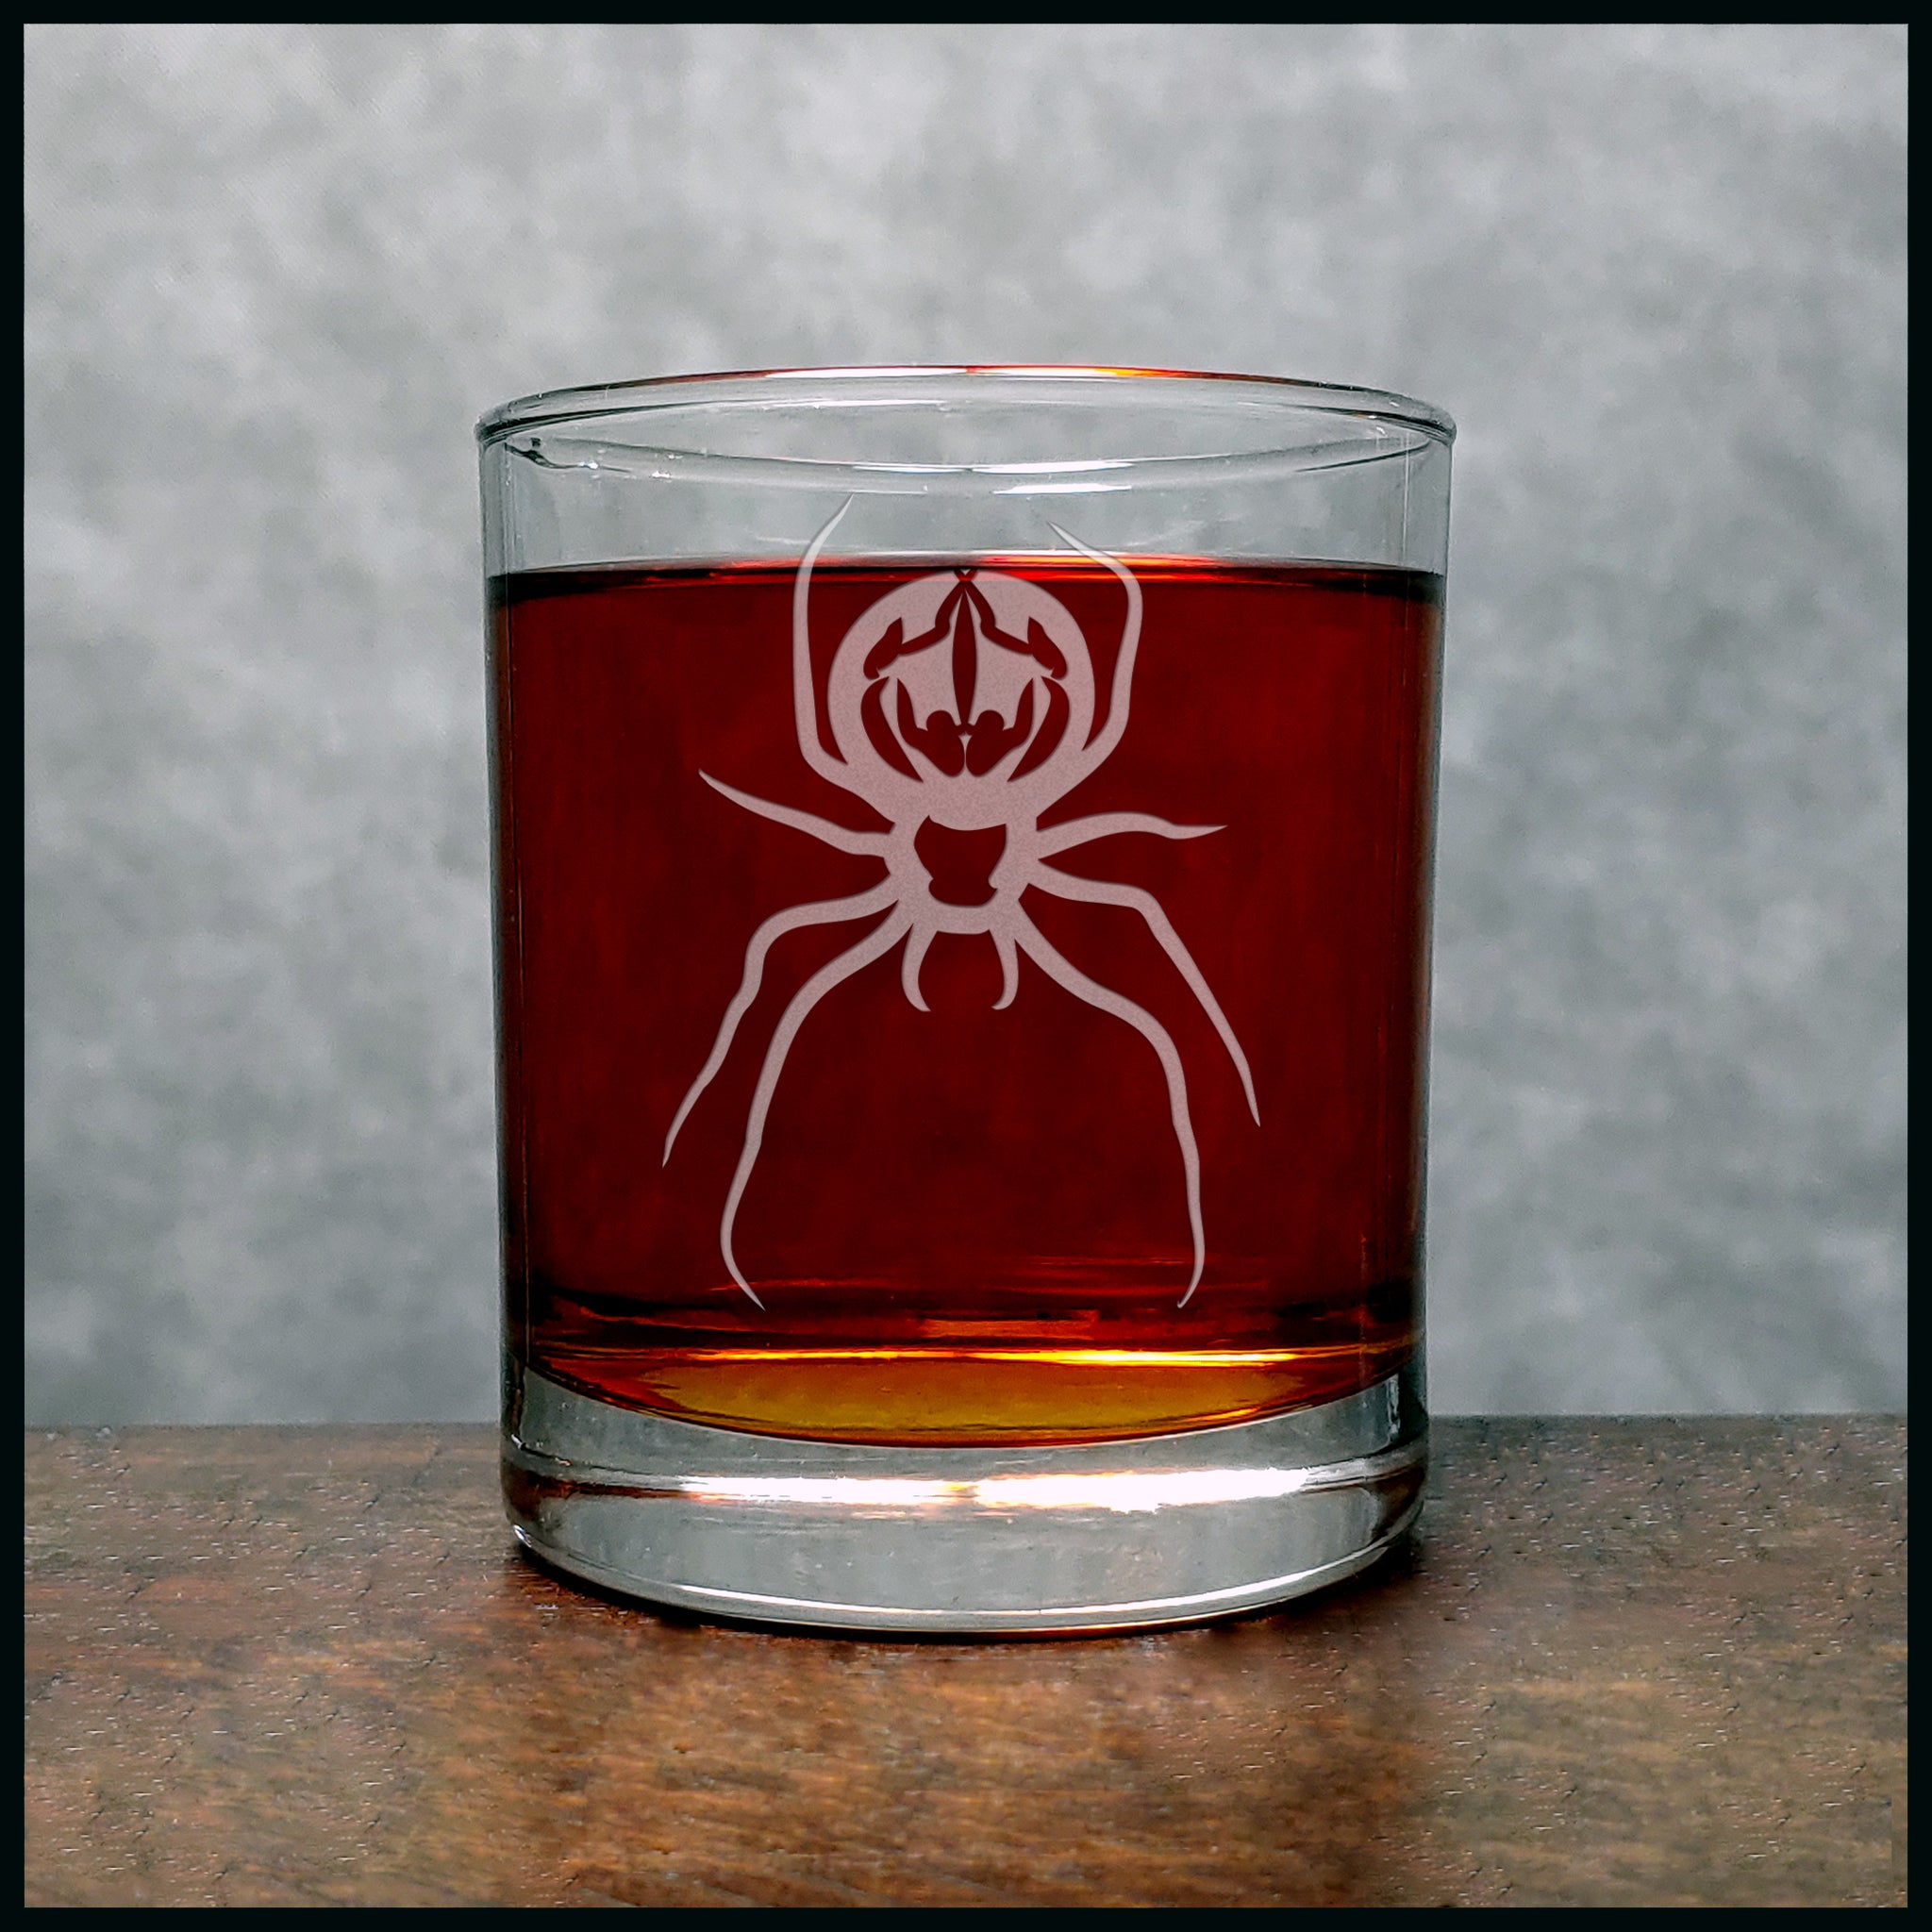 Spider  Whisky Glass - Design 5 - Copyright Hues in Glass